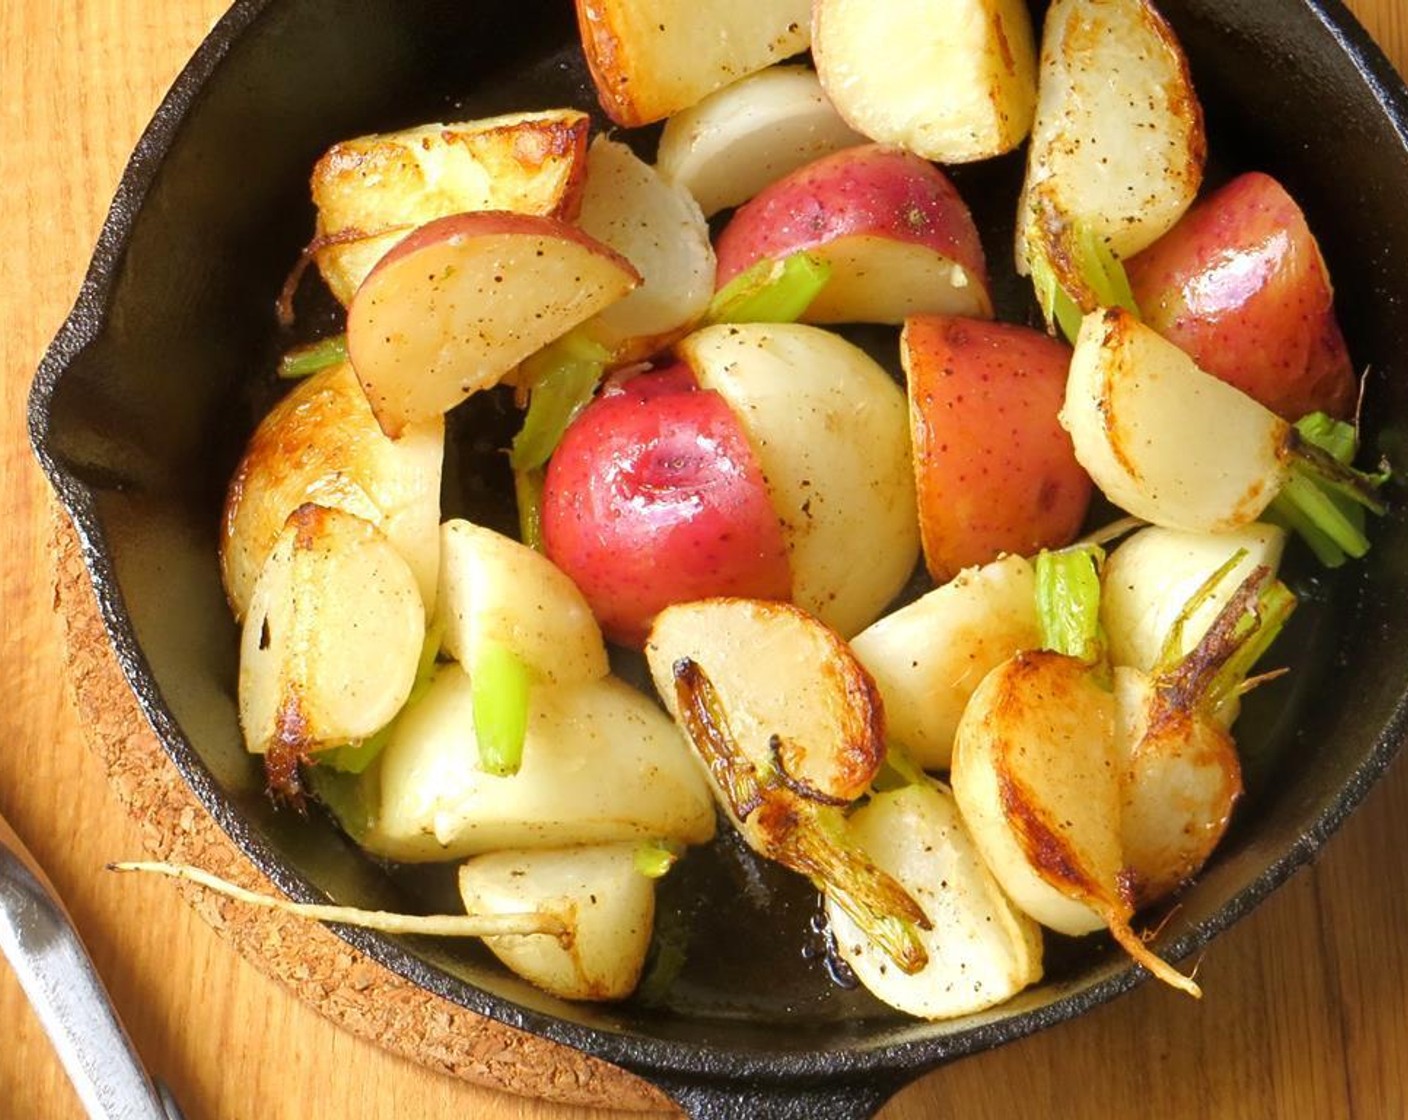 step 6 In a medium skillet or cast iron pan, heat 1/2 teaspoon of the Butter (1/2 Tbsp) and 2 teaspoons of the Olive Oil (1 Tbsp) over medium to medium-high heat. Add sliced turnips and potatoes. Sauté vegetables until crispy and browned. Transfer to a bowl.